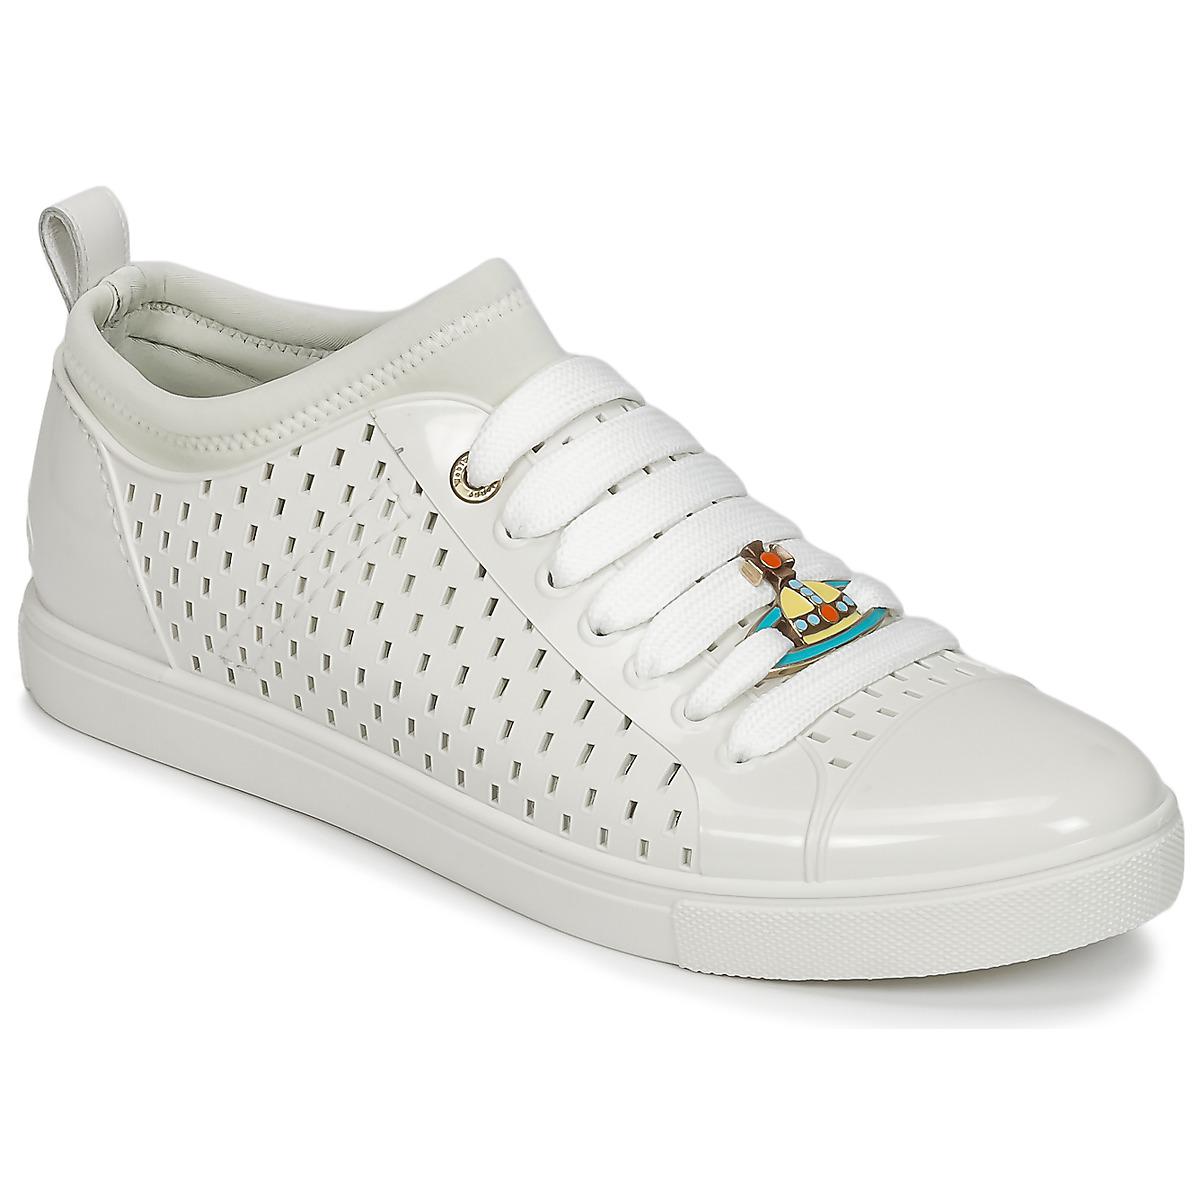 vivienne westwood trainers,Save up to 17%,www.ilcascinone.com